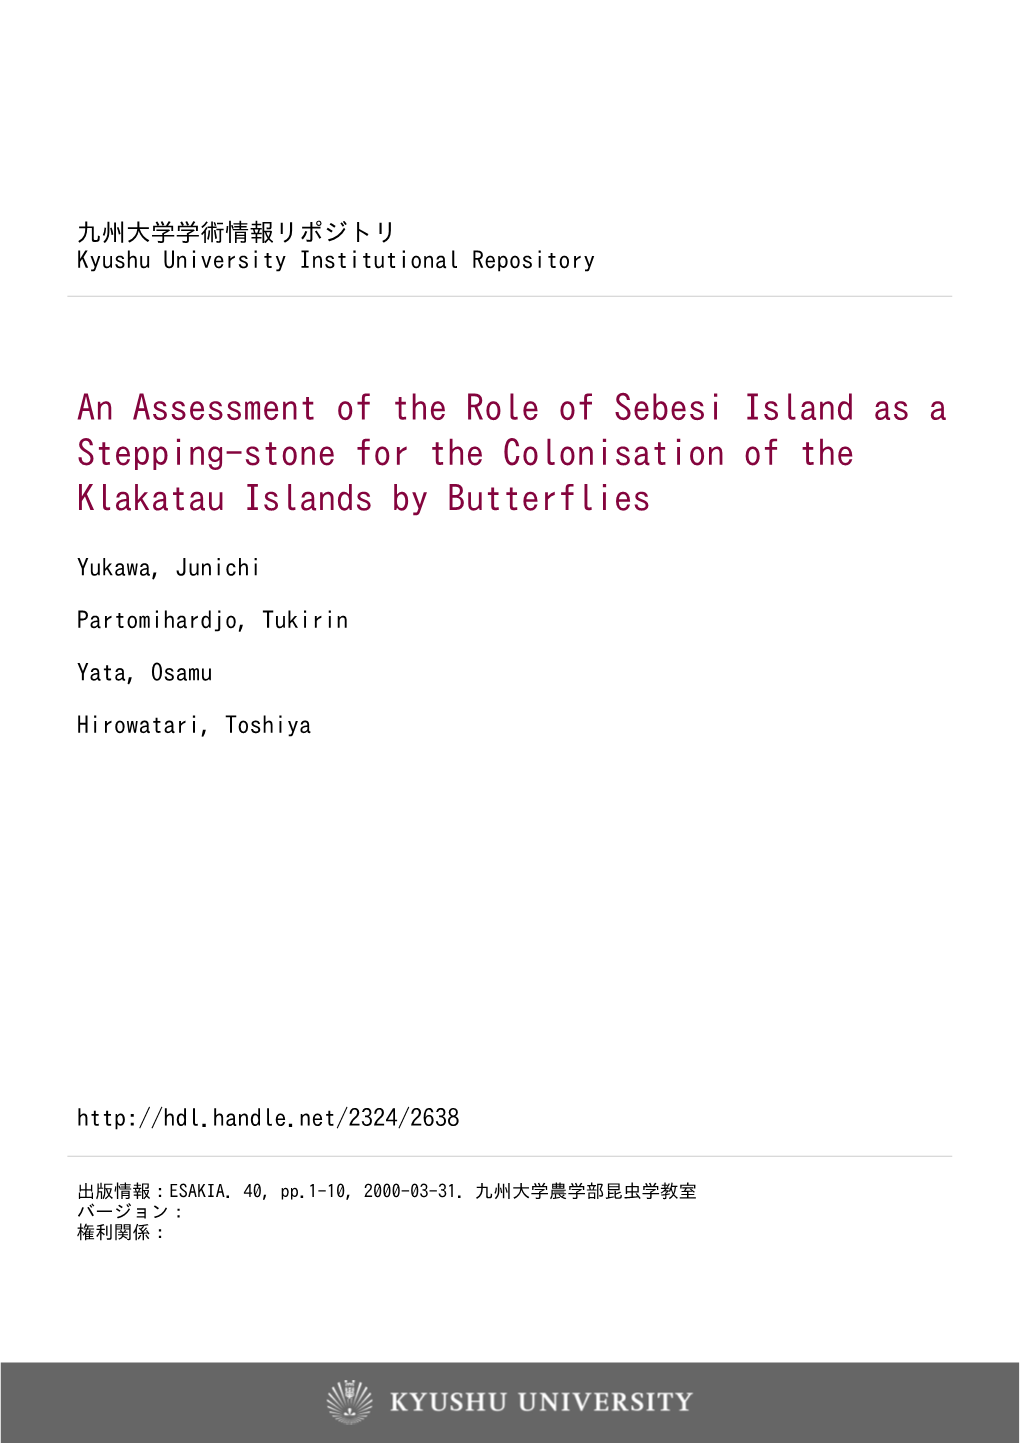 An Assessment of the Role of Sebesi Island As a Stepping-Stone for the Colonisation of the Klakatau Islands by Butterflies